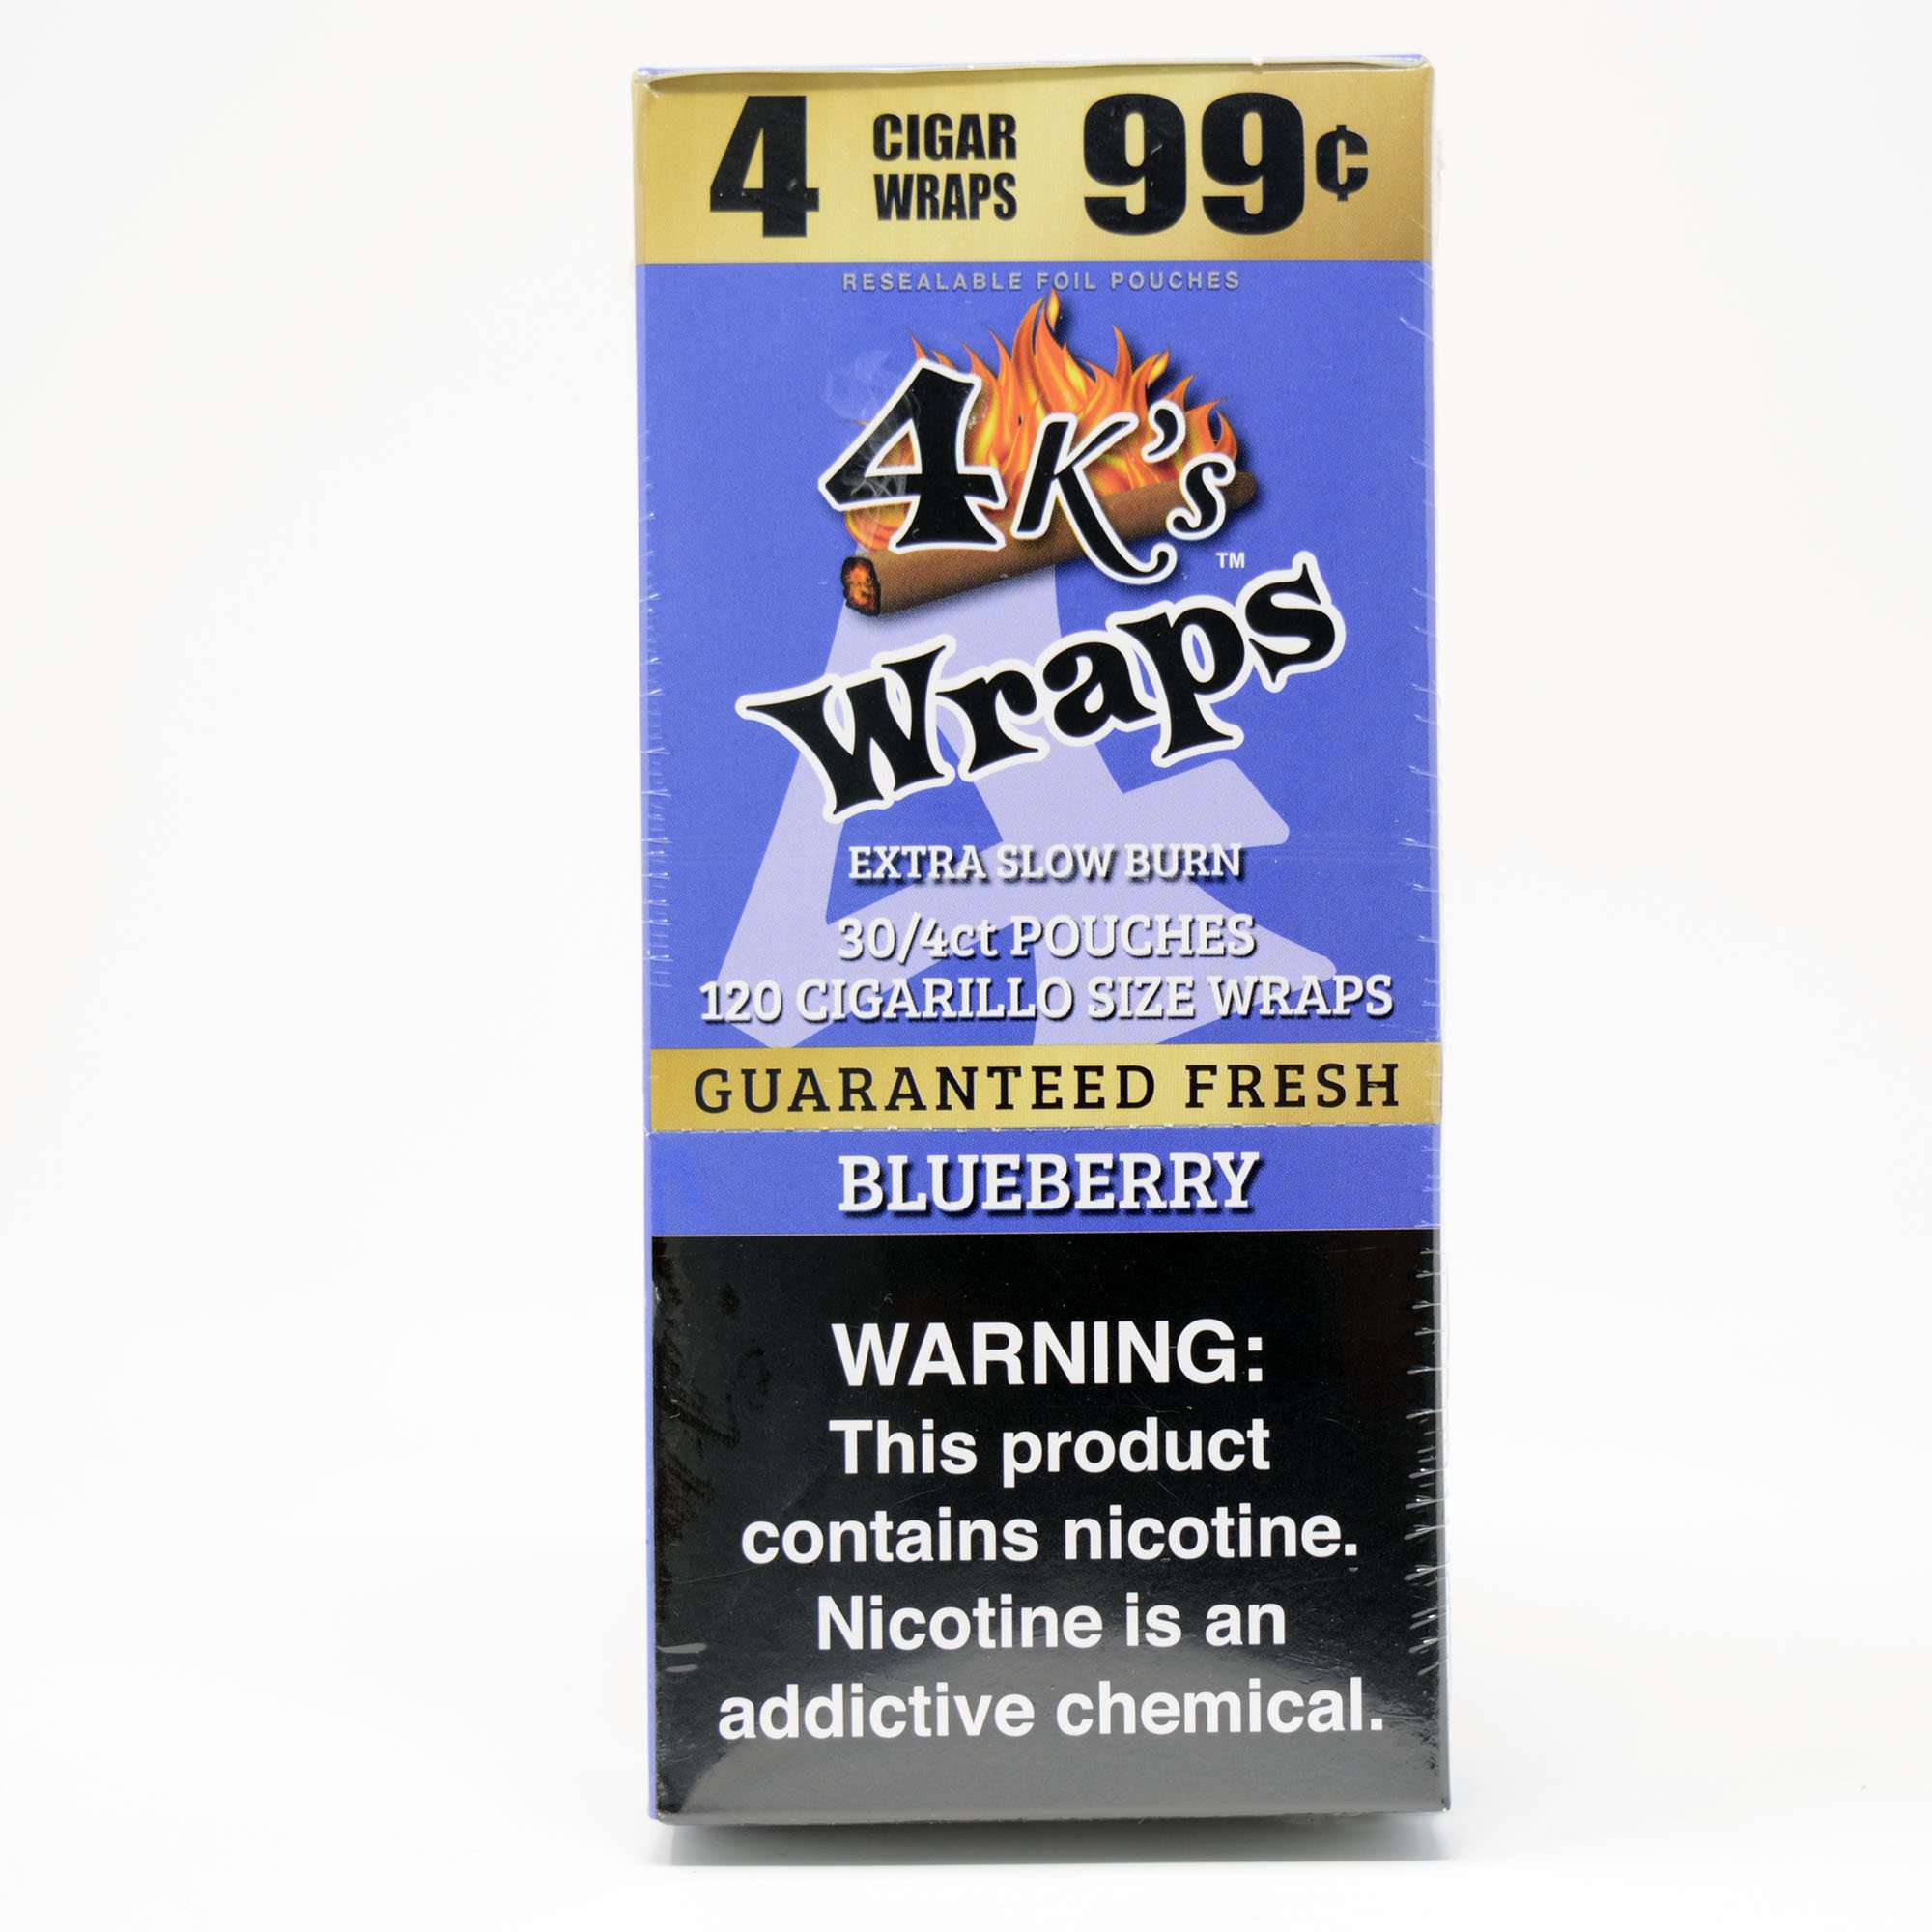 4 KING WRAP 4 for 99 30 Count